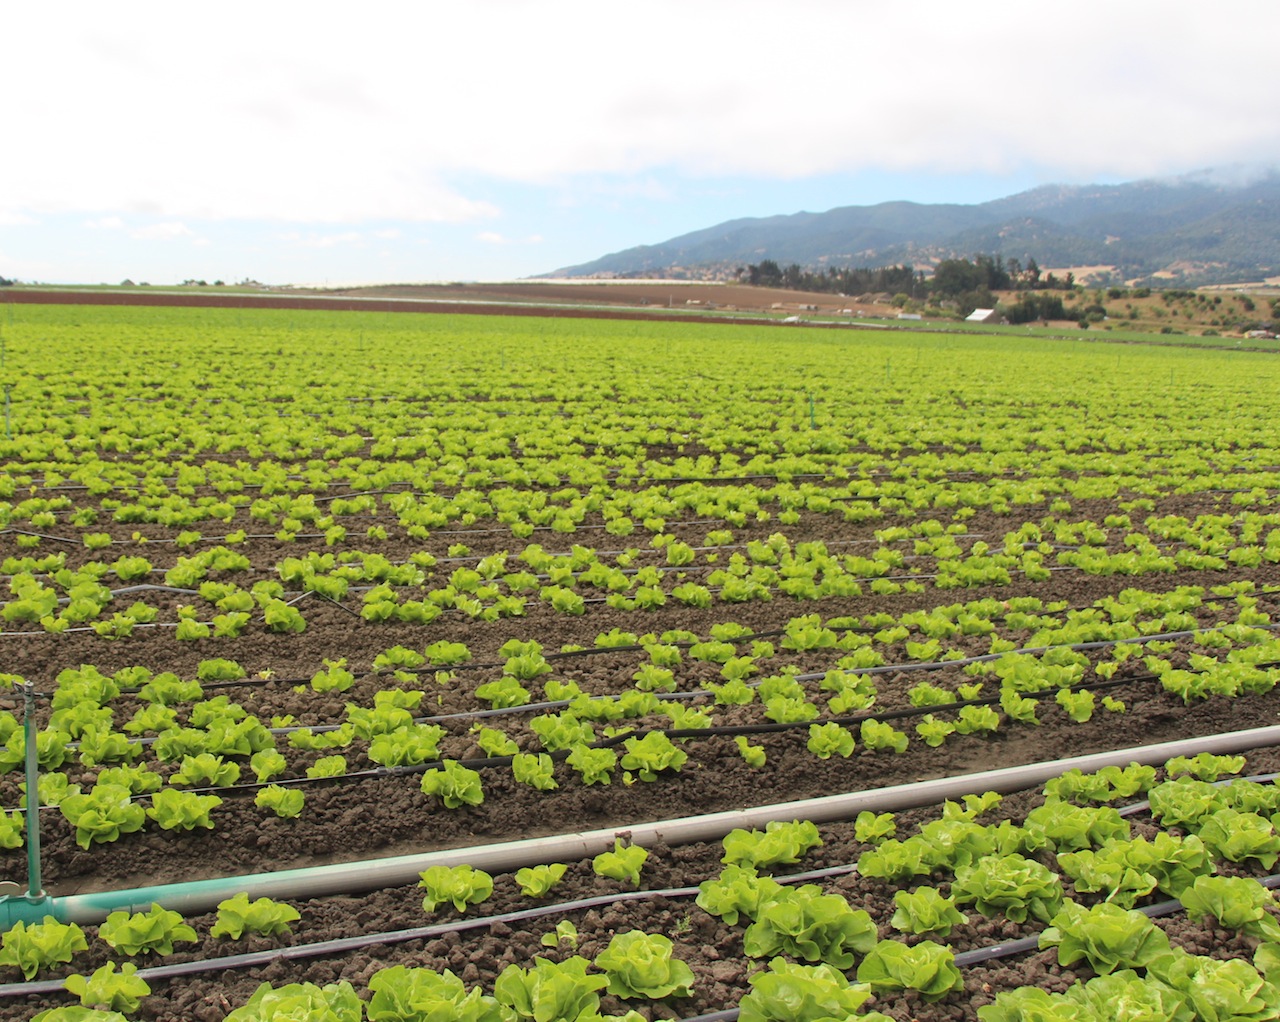 Rows and rows of butterhead lettuce in Salinas, CA